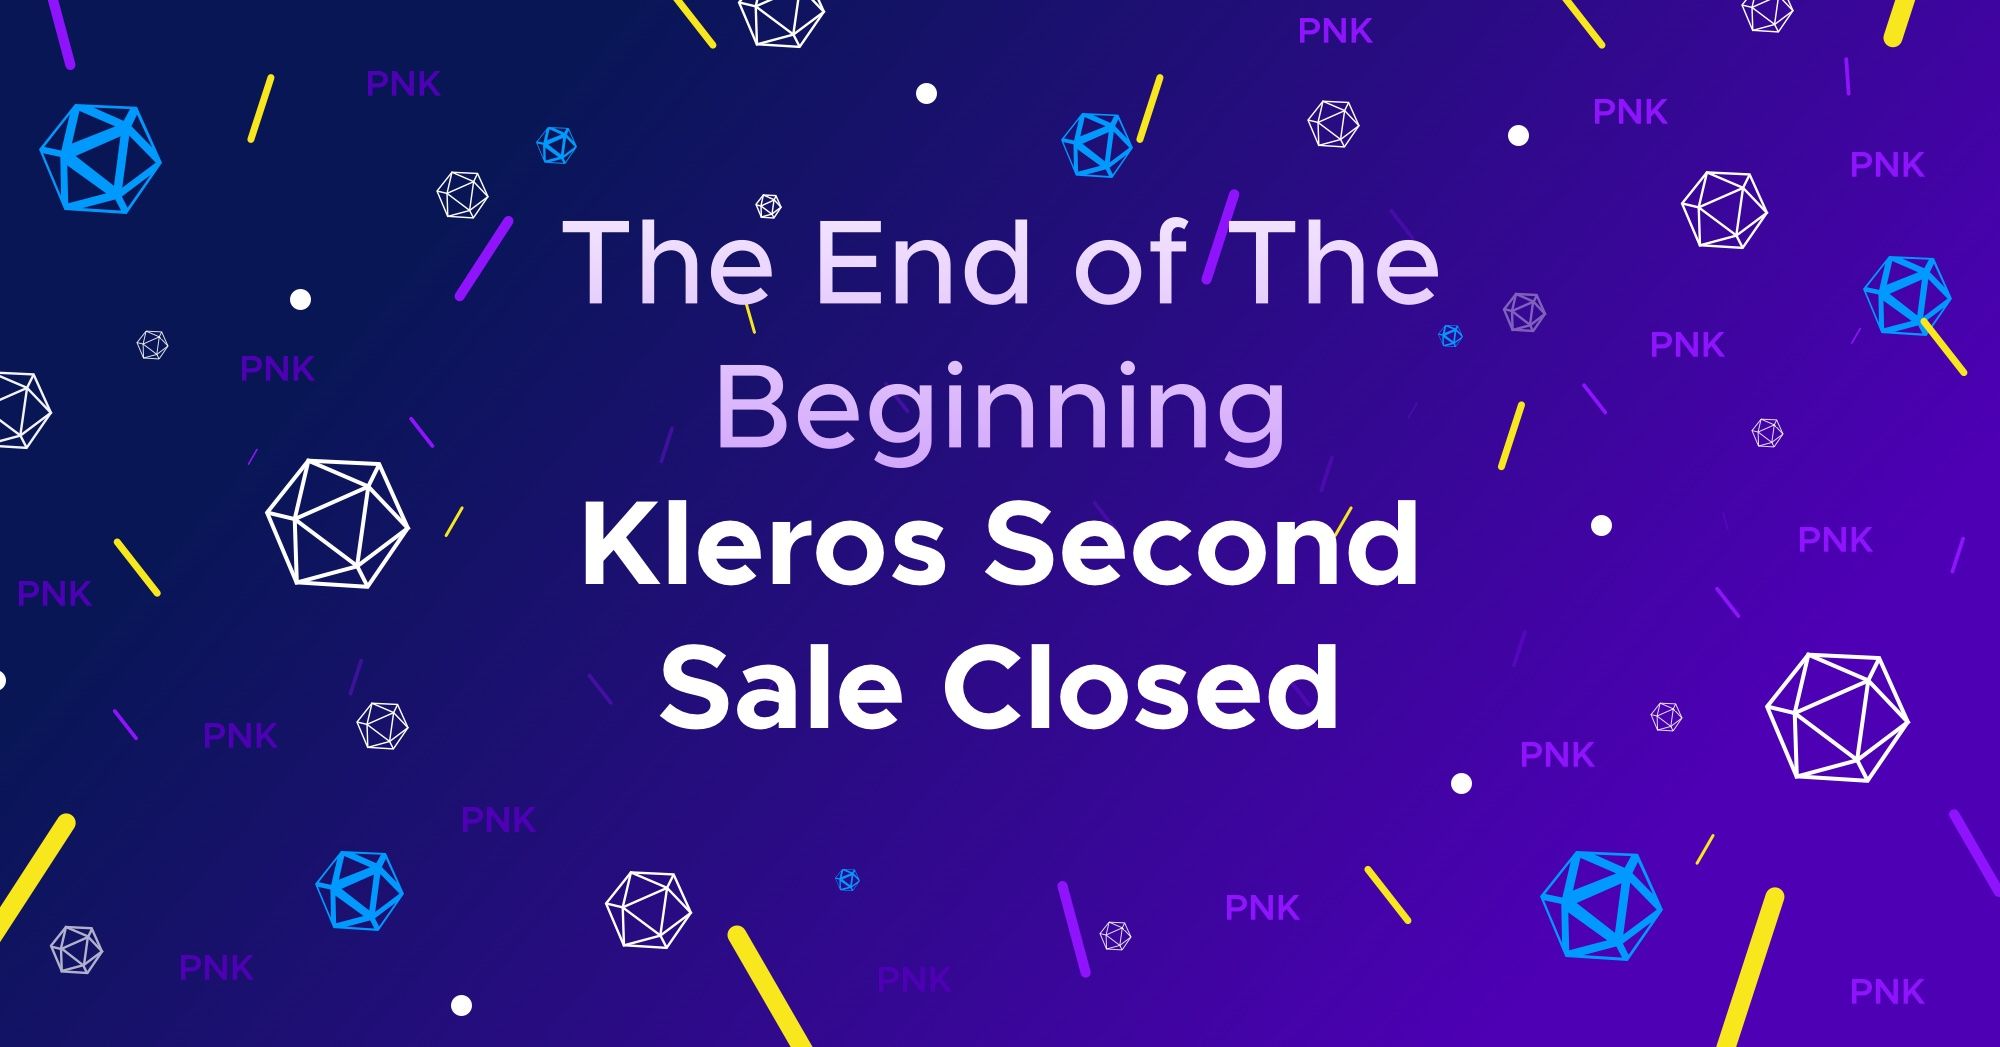 The End of The Beginning - Kleros Second Sale Closed